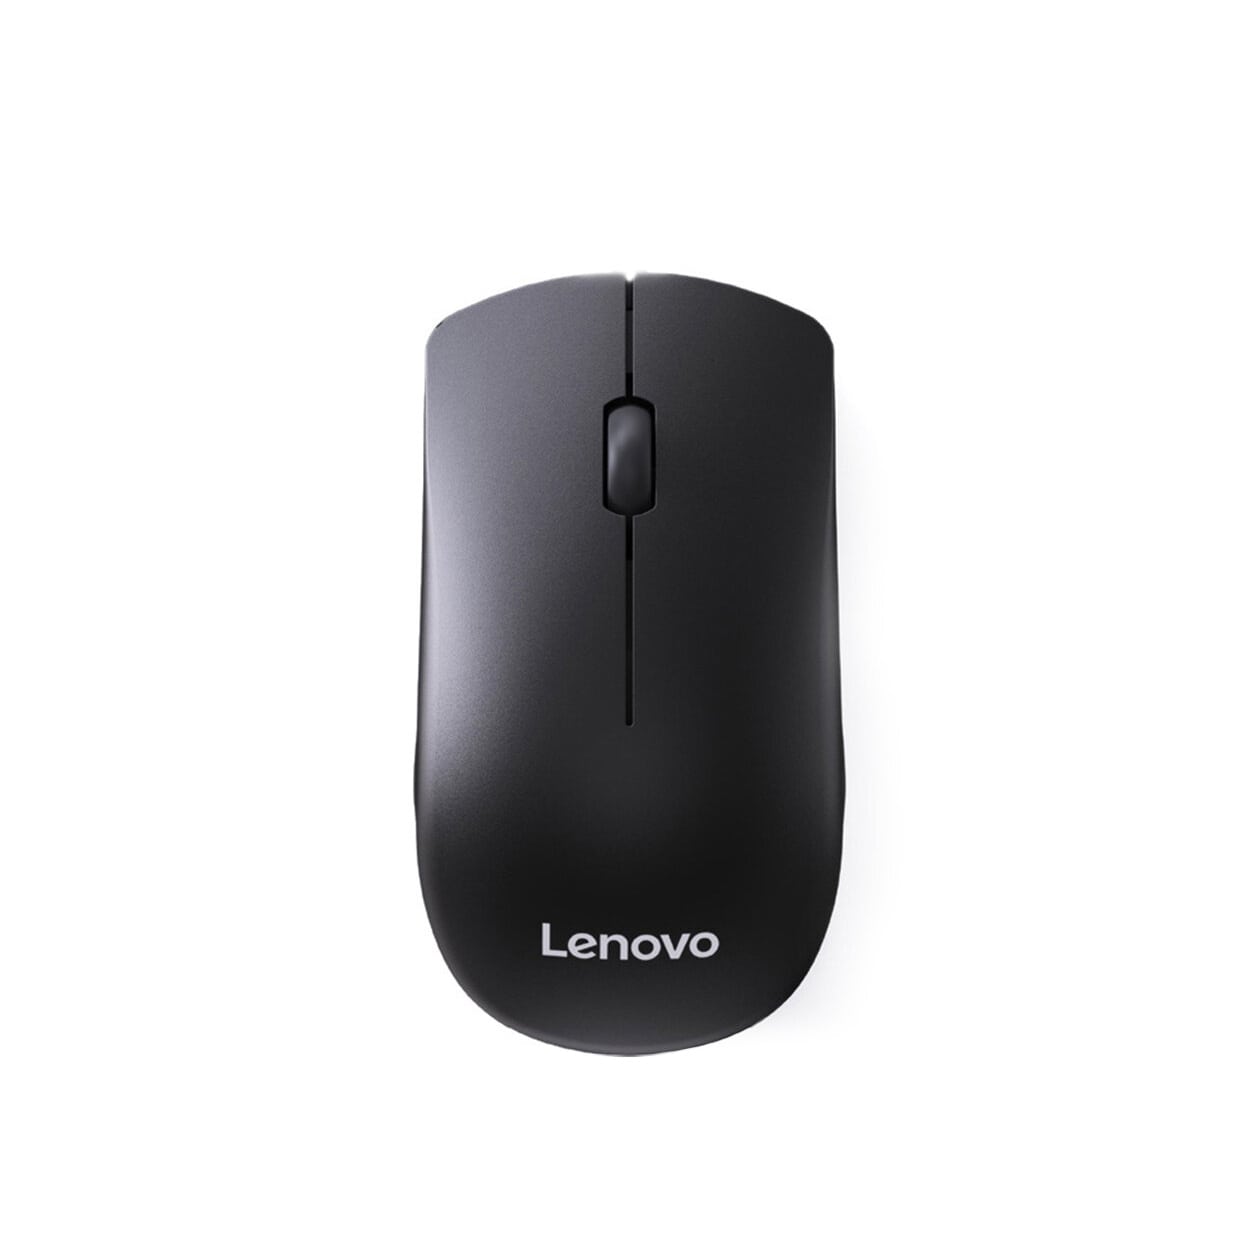 Lenovo One-click M26 Wireless Mouse   |  Computer Accessories  |  Mouses  |  Wireless Mouses  |